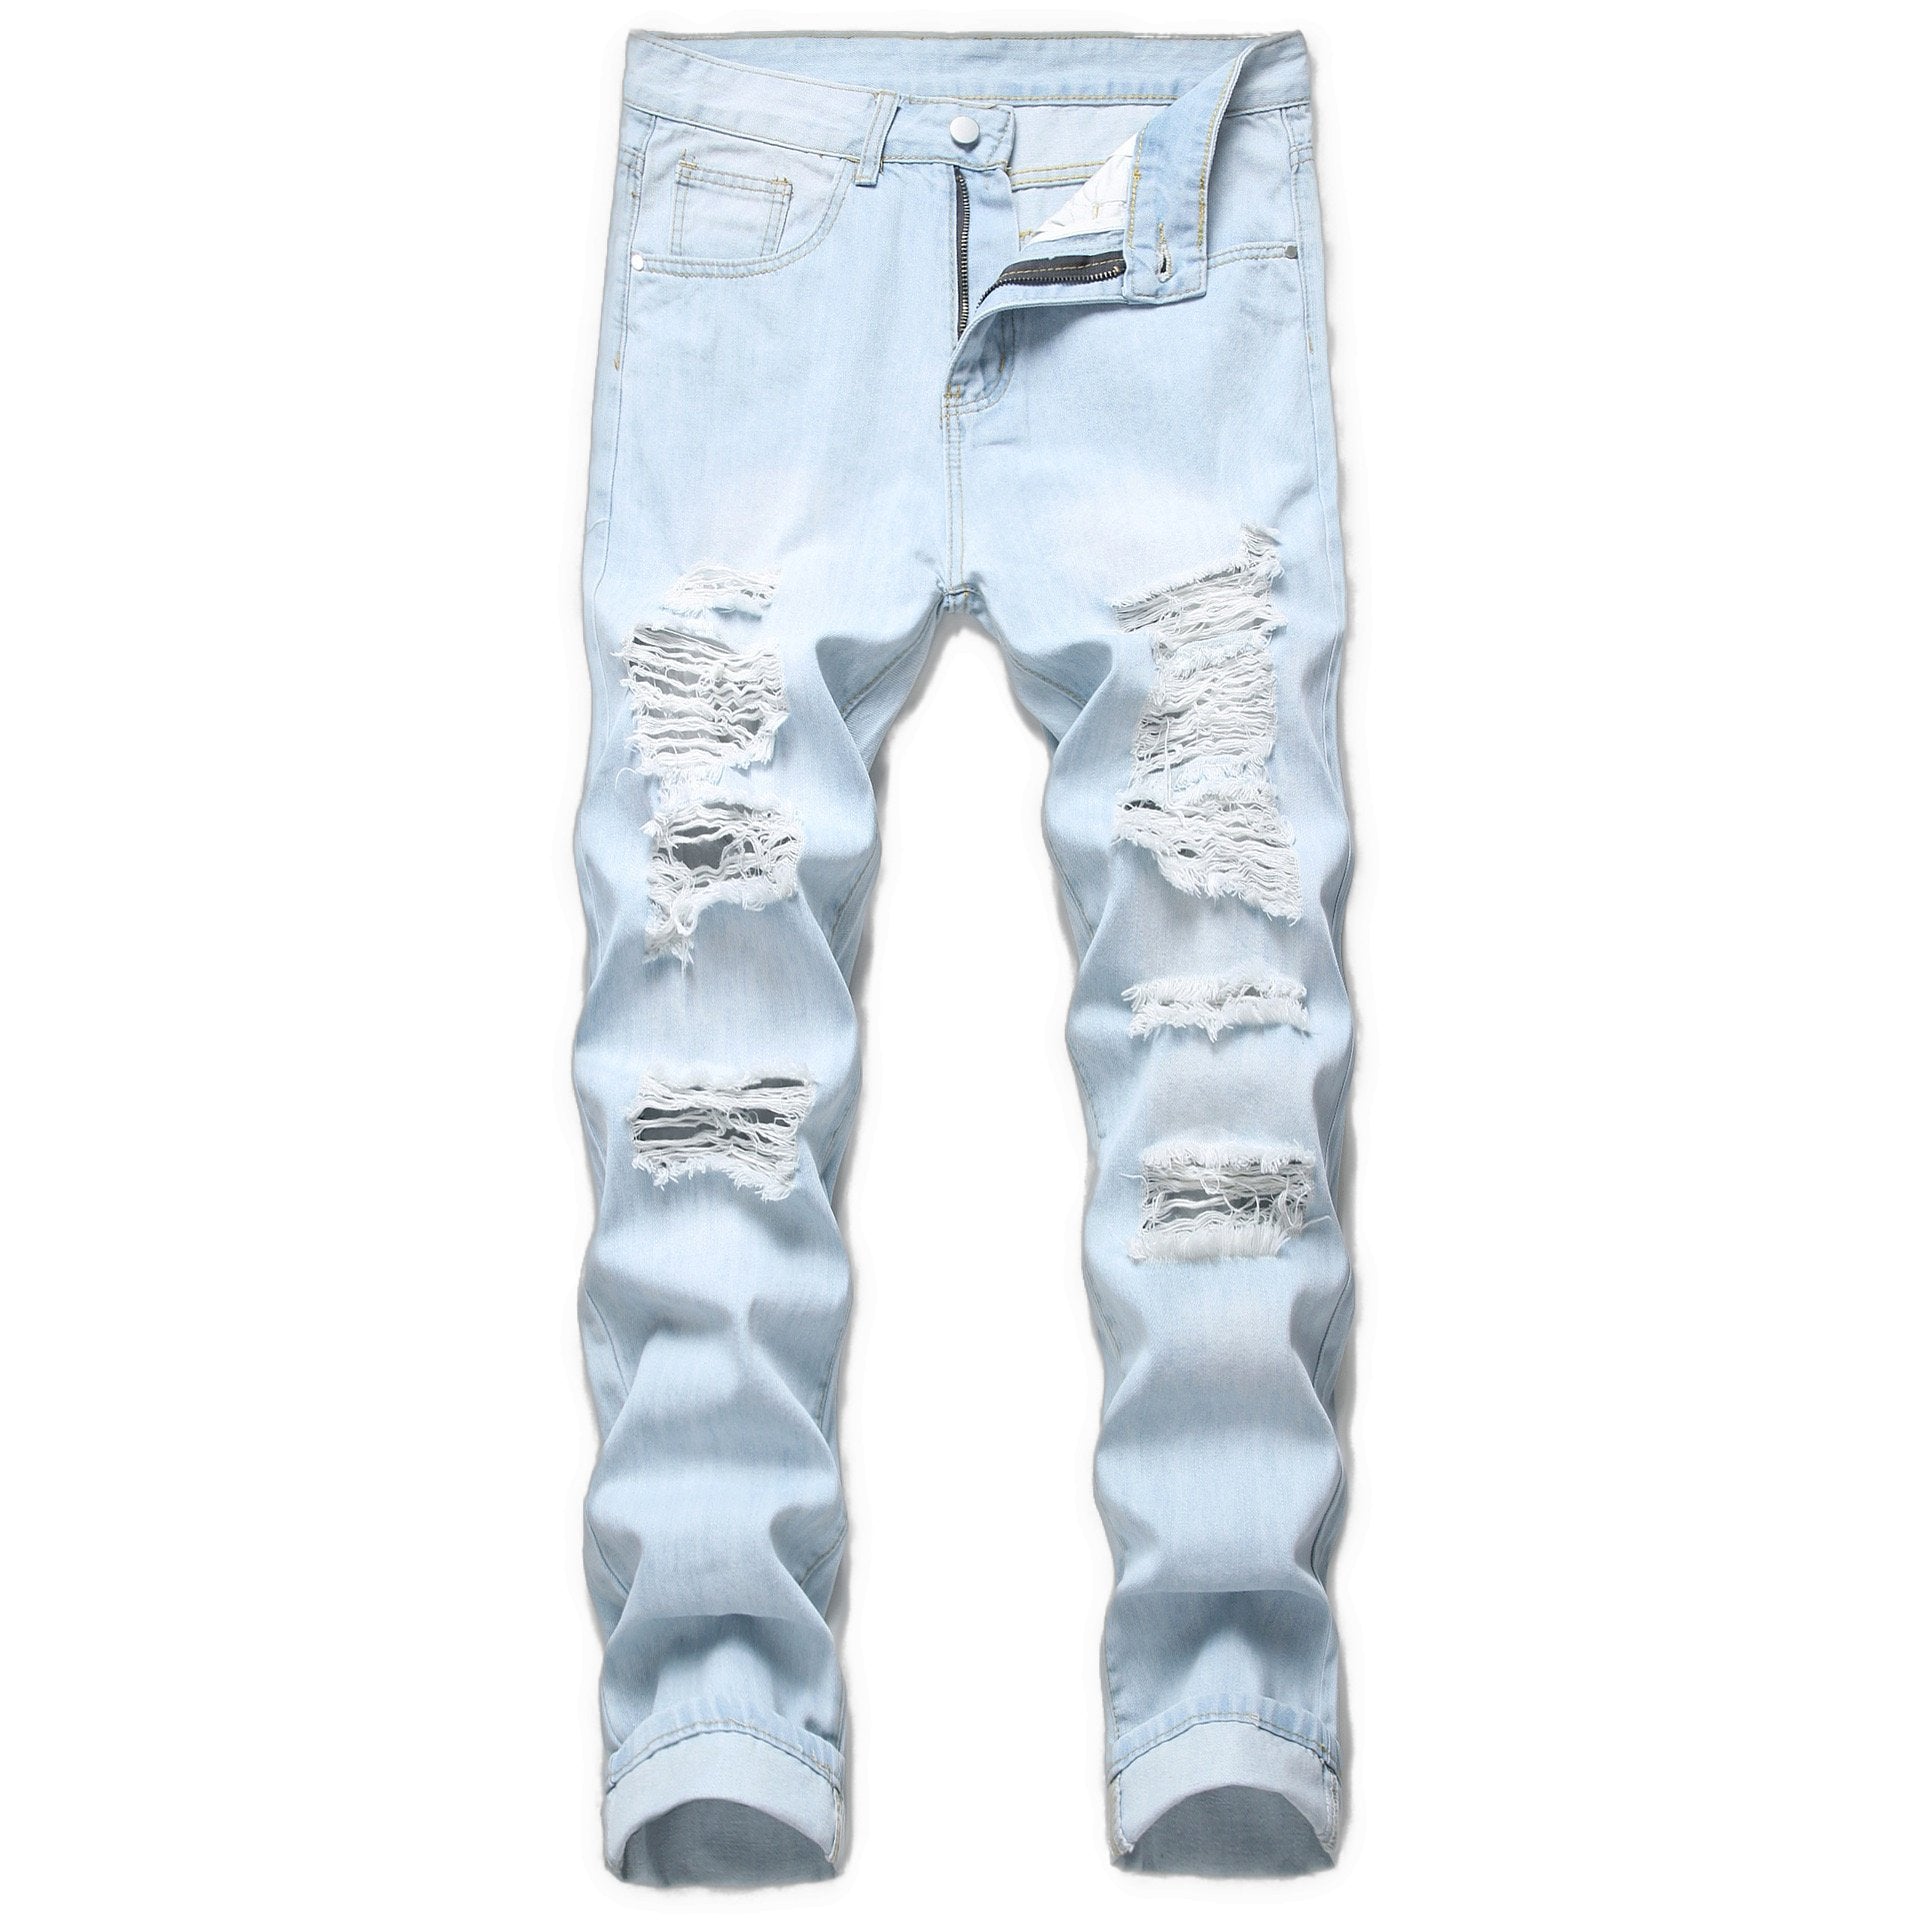 CHGY - Denim Jeans for Men - Sarman Fashion - Wholesale Clothing Fashion Brand for Men from Canada